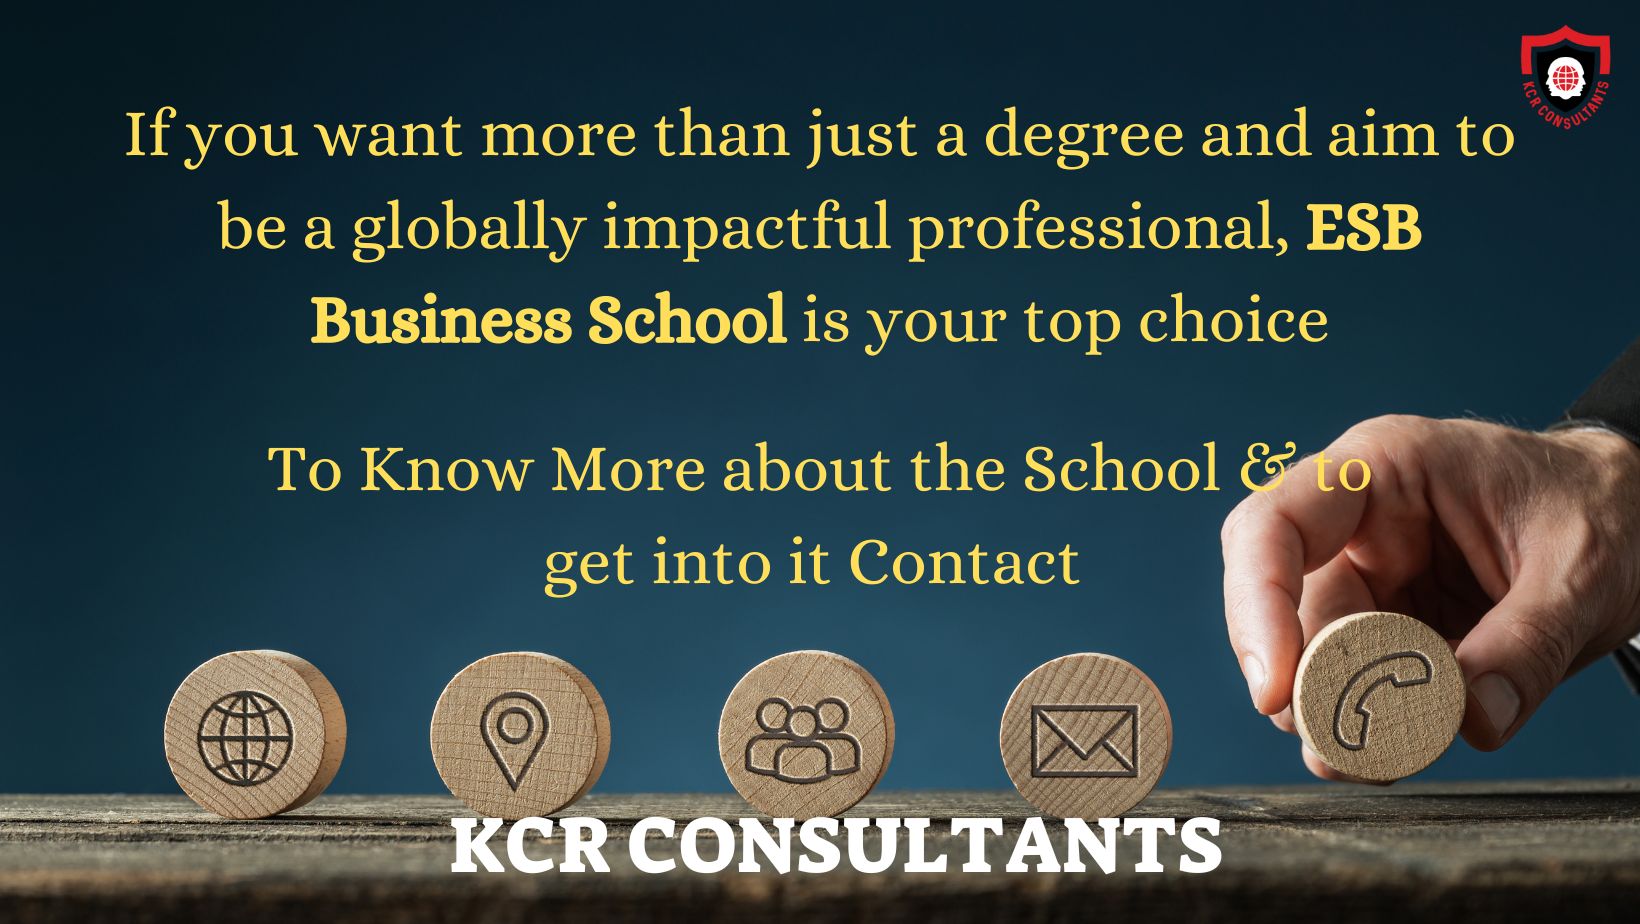 ESB Business School - KCR CONSULTANTS - Contact us